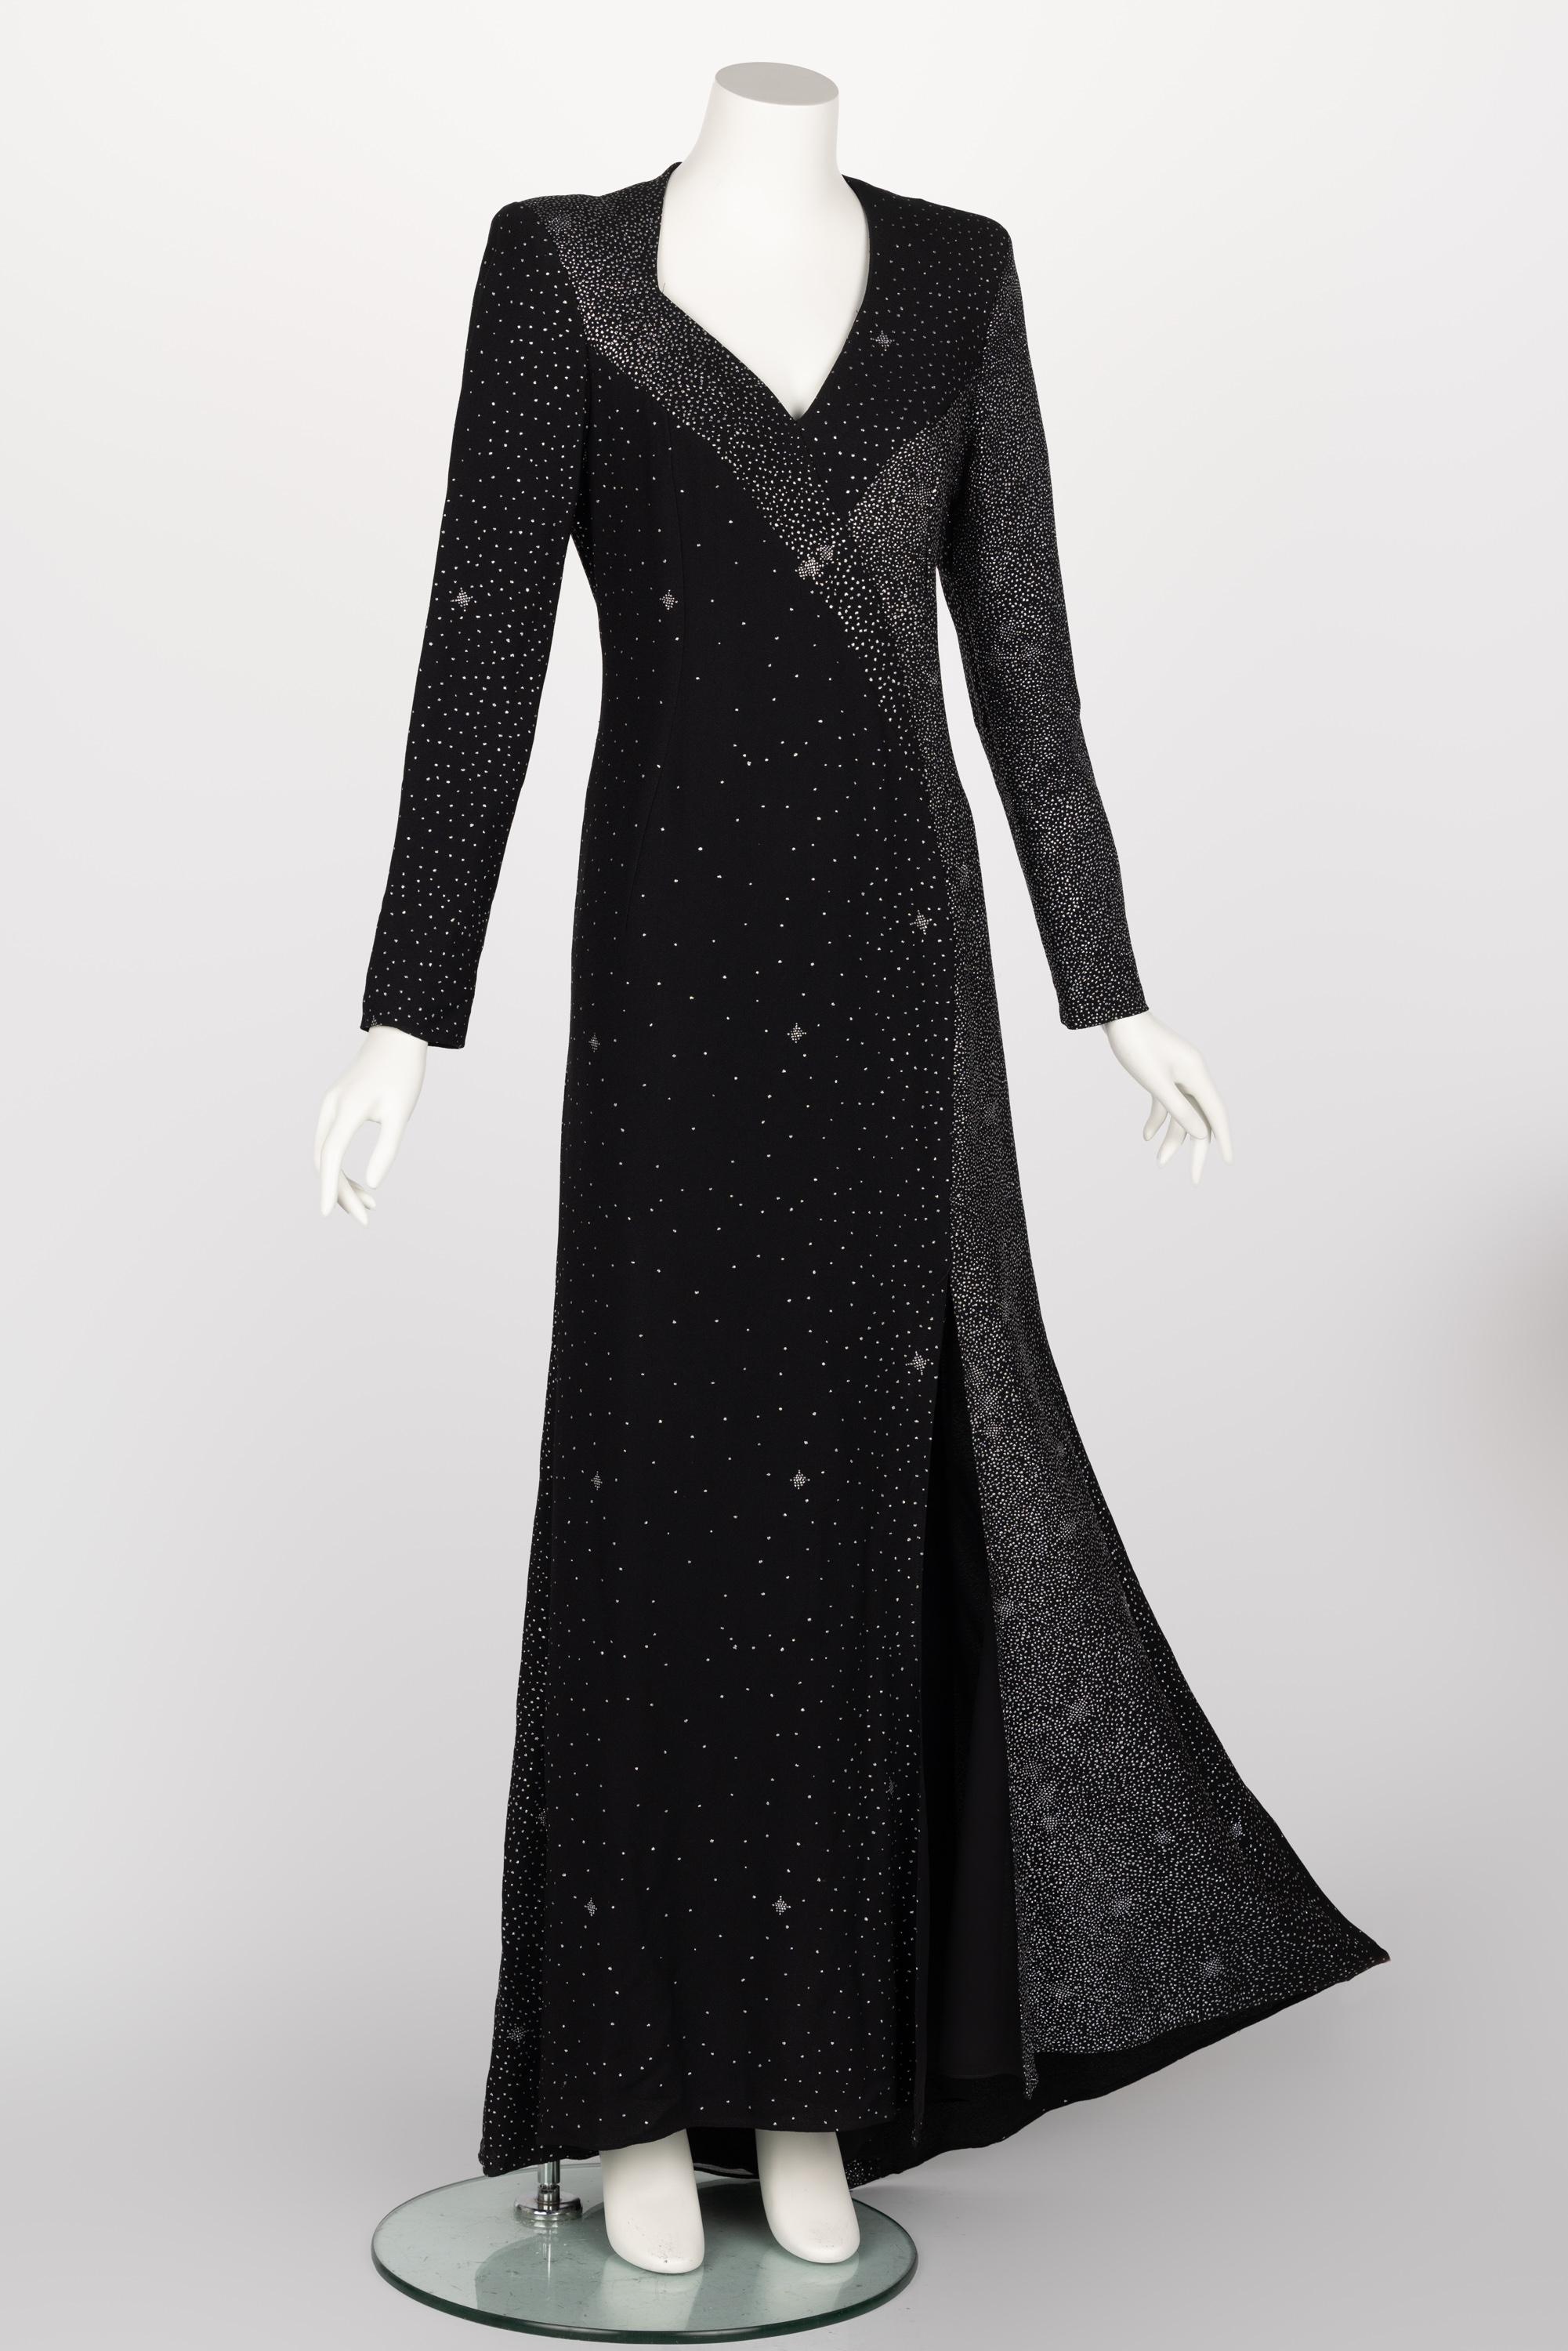 Christian Lacroix Midnight Sparkle Runway Gown FW 98/99 For Sale 1